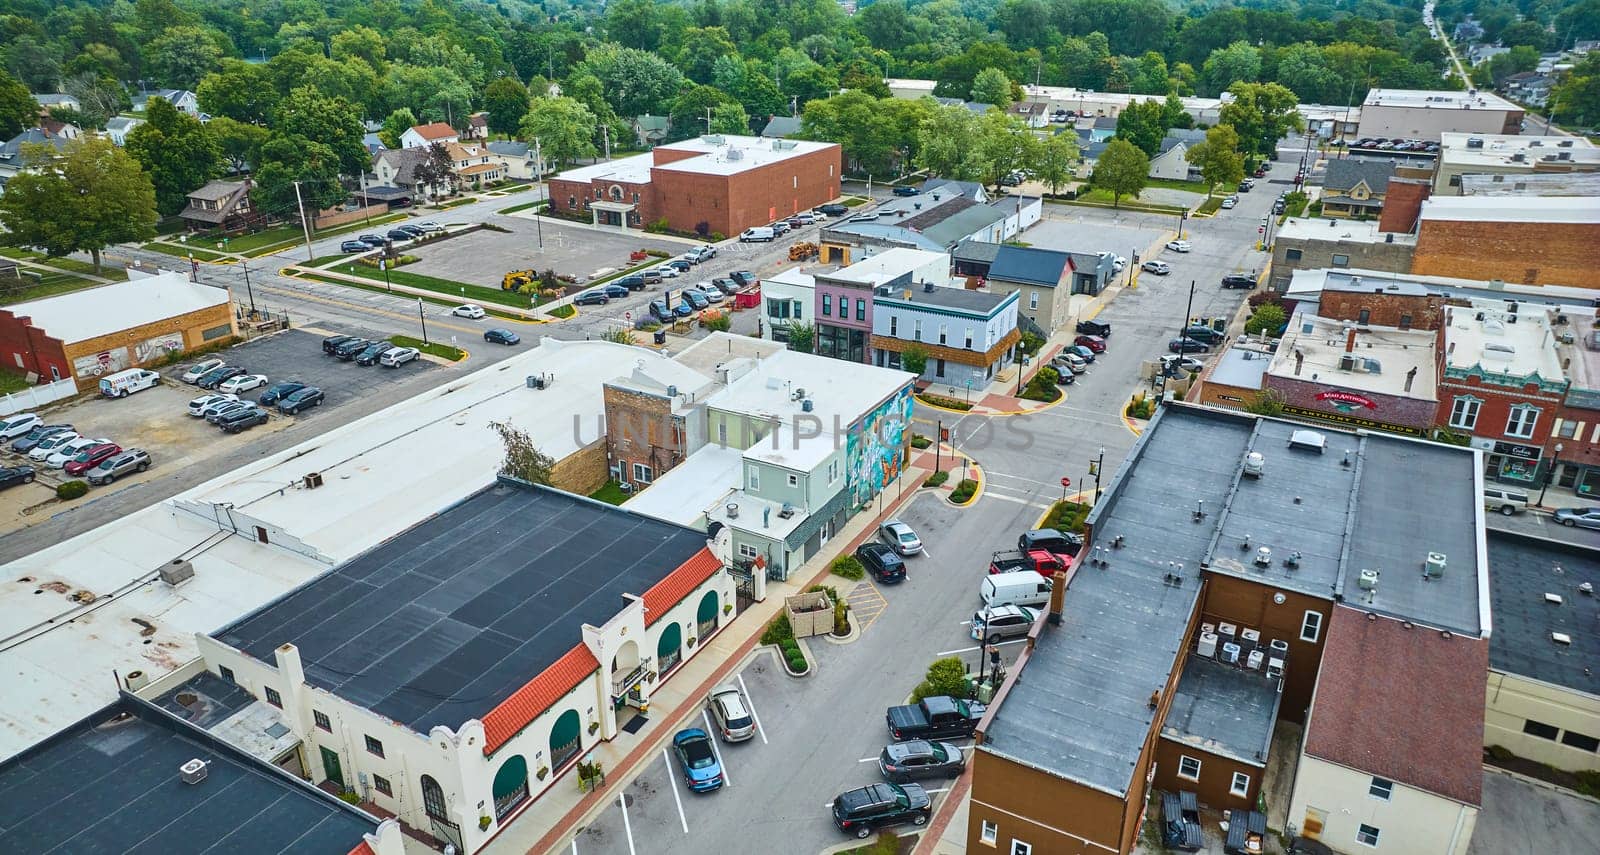 Image of Aerial downtown Auburn Indiana with shop buildings